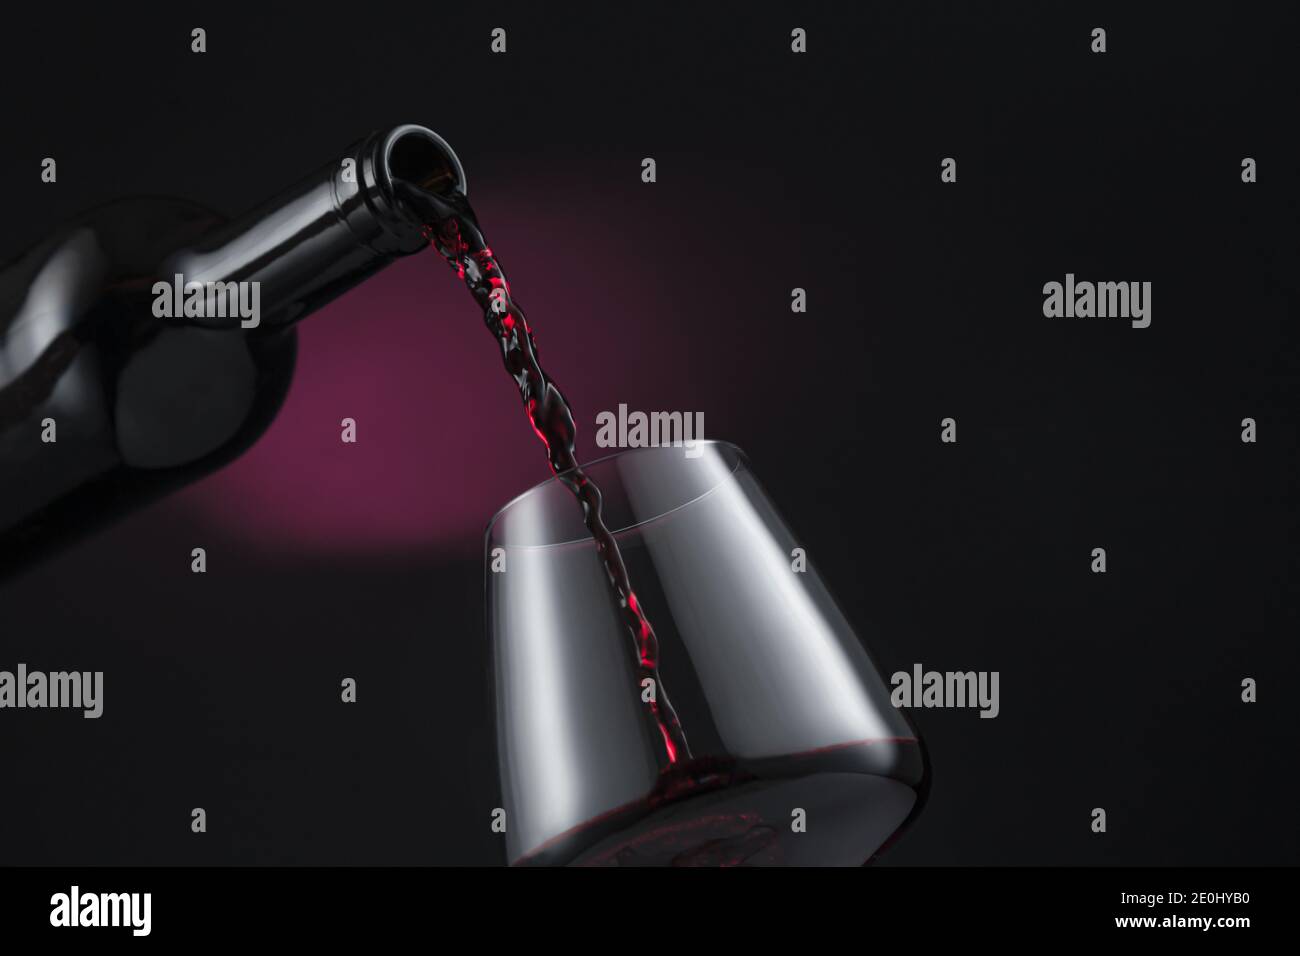 Bottle of red wine poured into the wine glass, on black and red background. Stock Photo